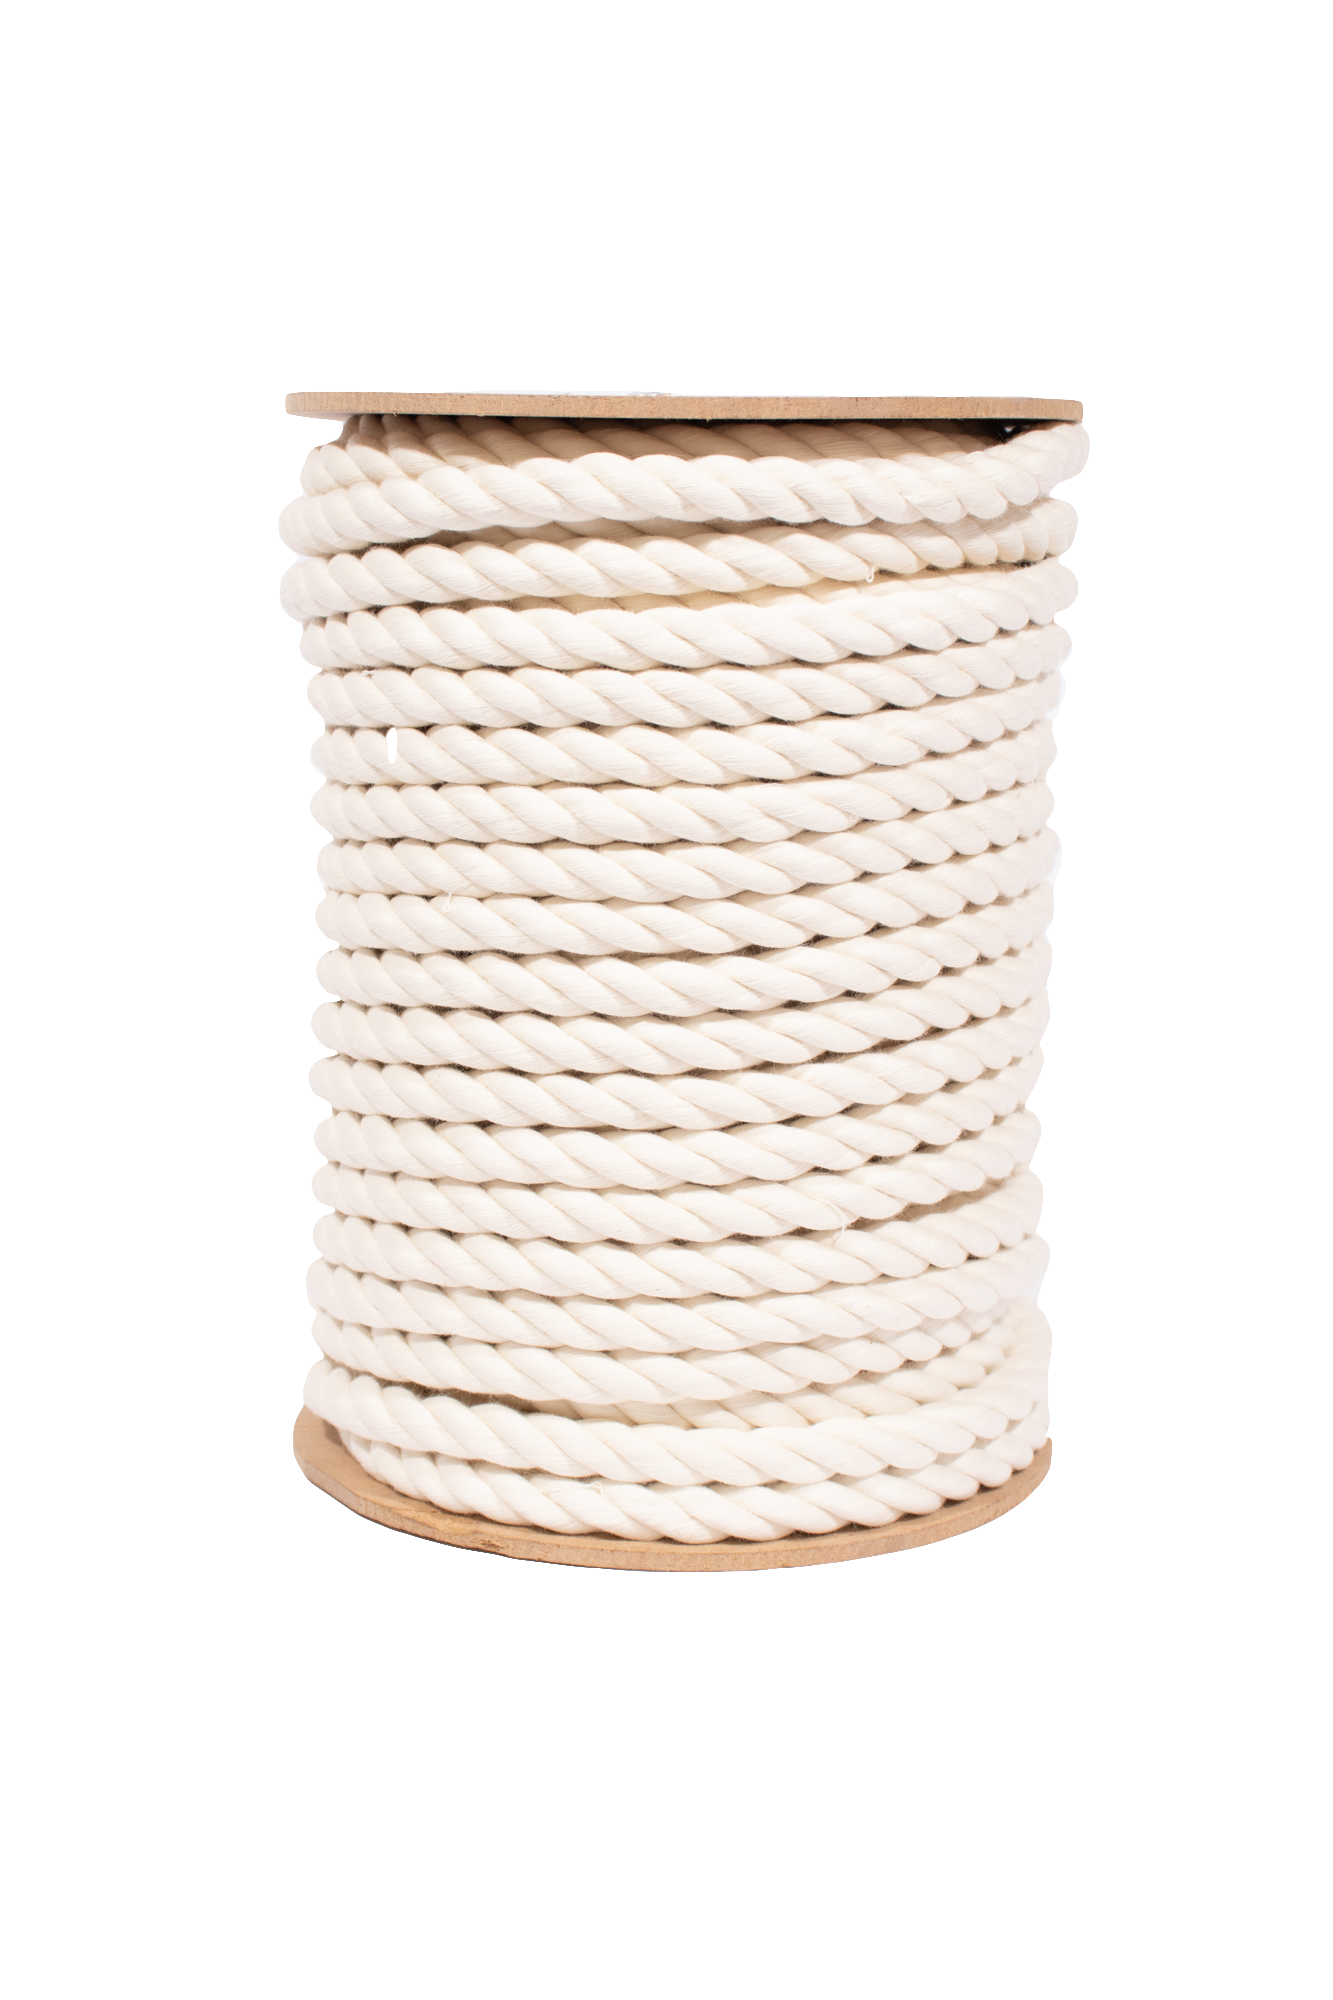 12mm cotton rope in Natural